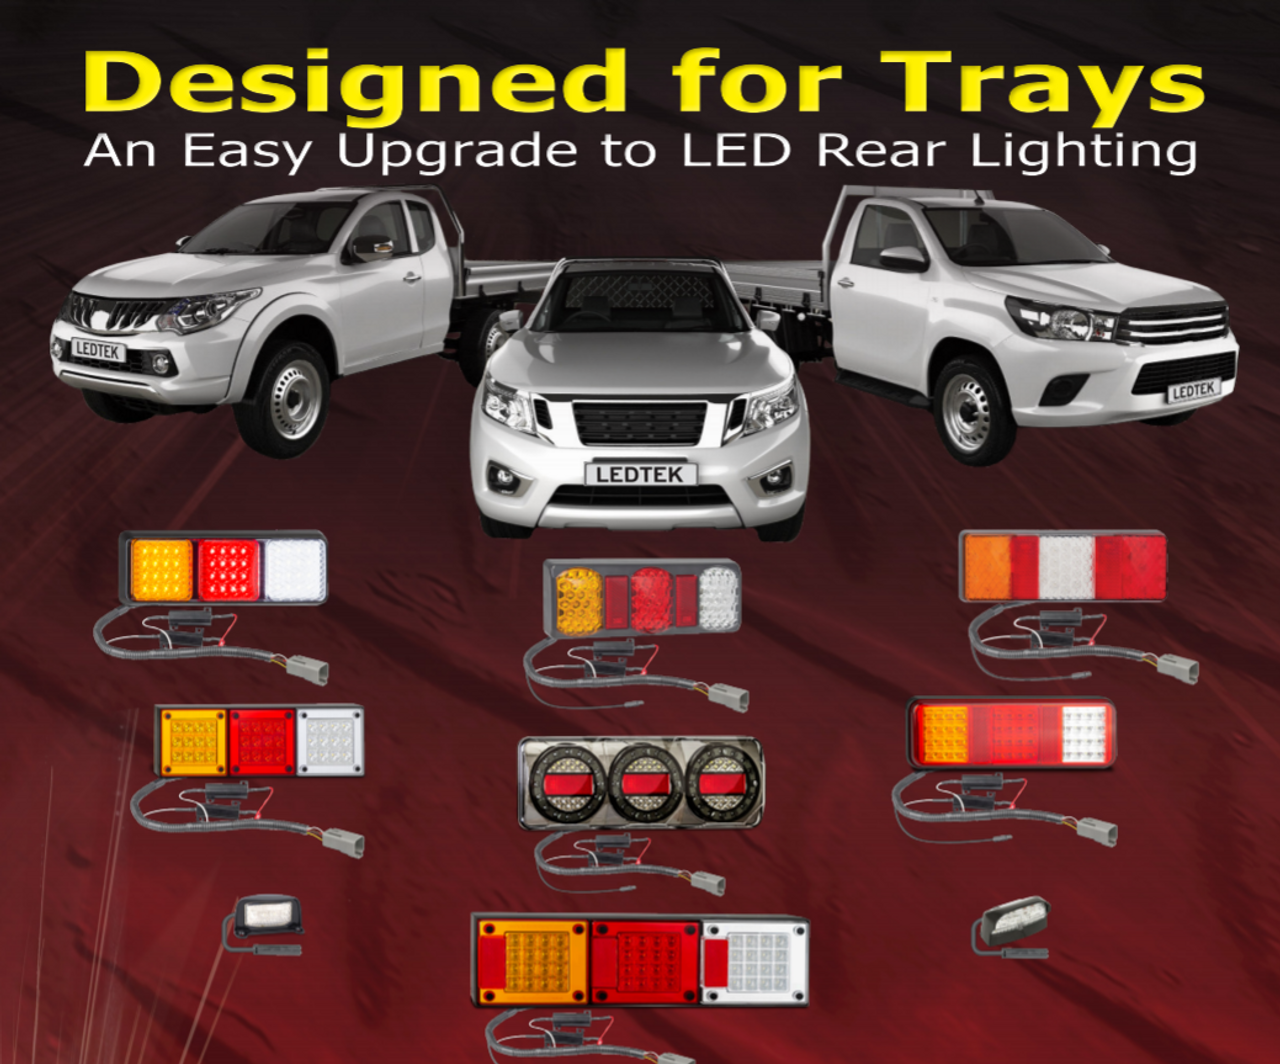 SO283ARW2LR12+PATCHL-CRUISER - Land Cruiser LED Patch Cable System. Plug and Play. LED Upgrade. Designed for Trays. 283 Series Light. Stop, Tail, Indicator and Reverse. 12v Only. Lamp with Conversion Cable. Application to Suit Toyota Land Cruiser. Autolamp. Ultimate LED. 